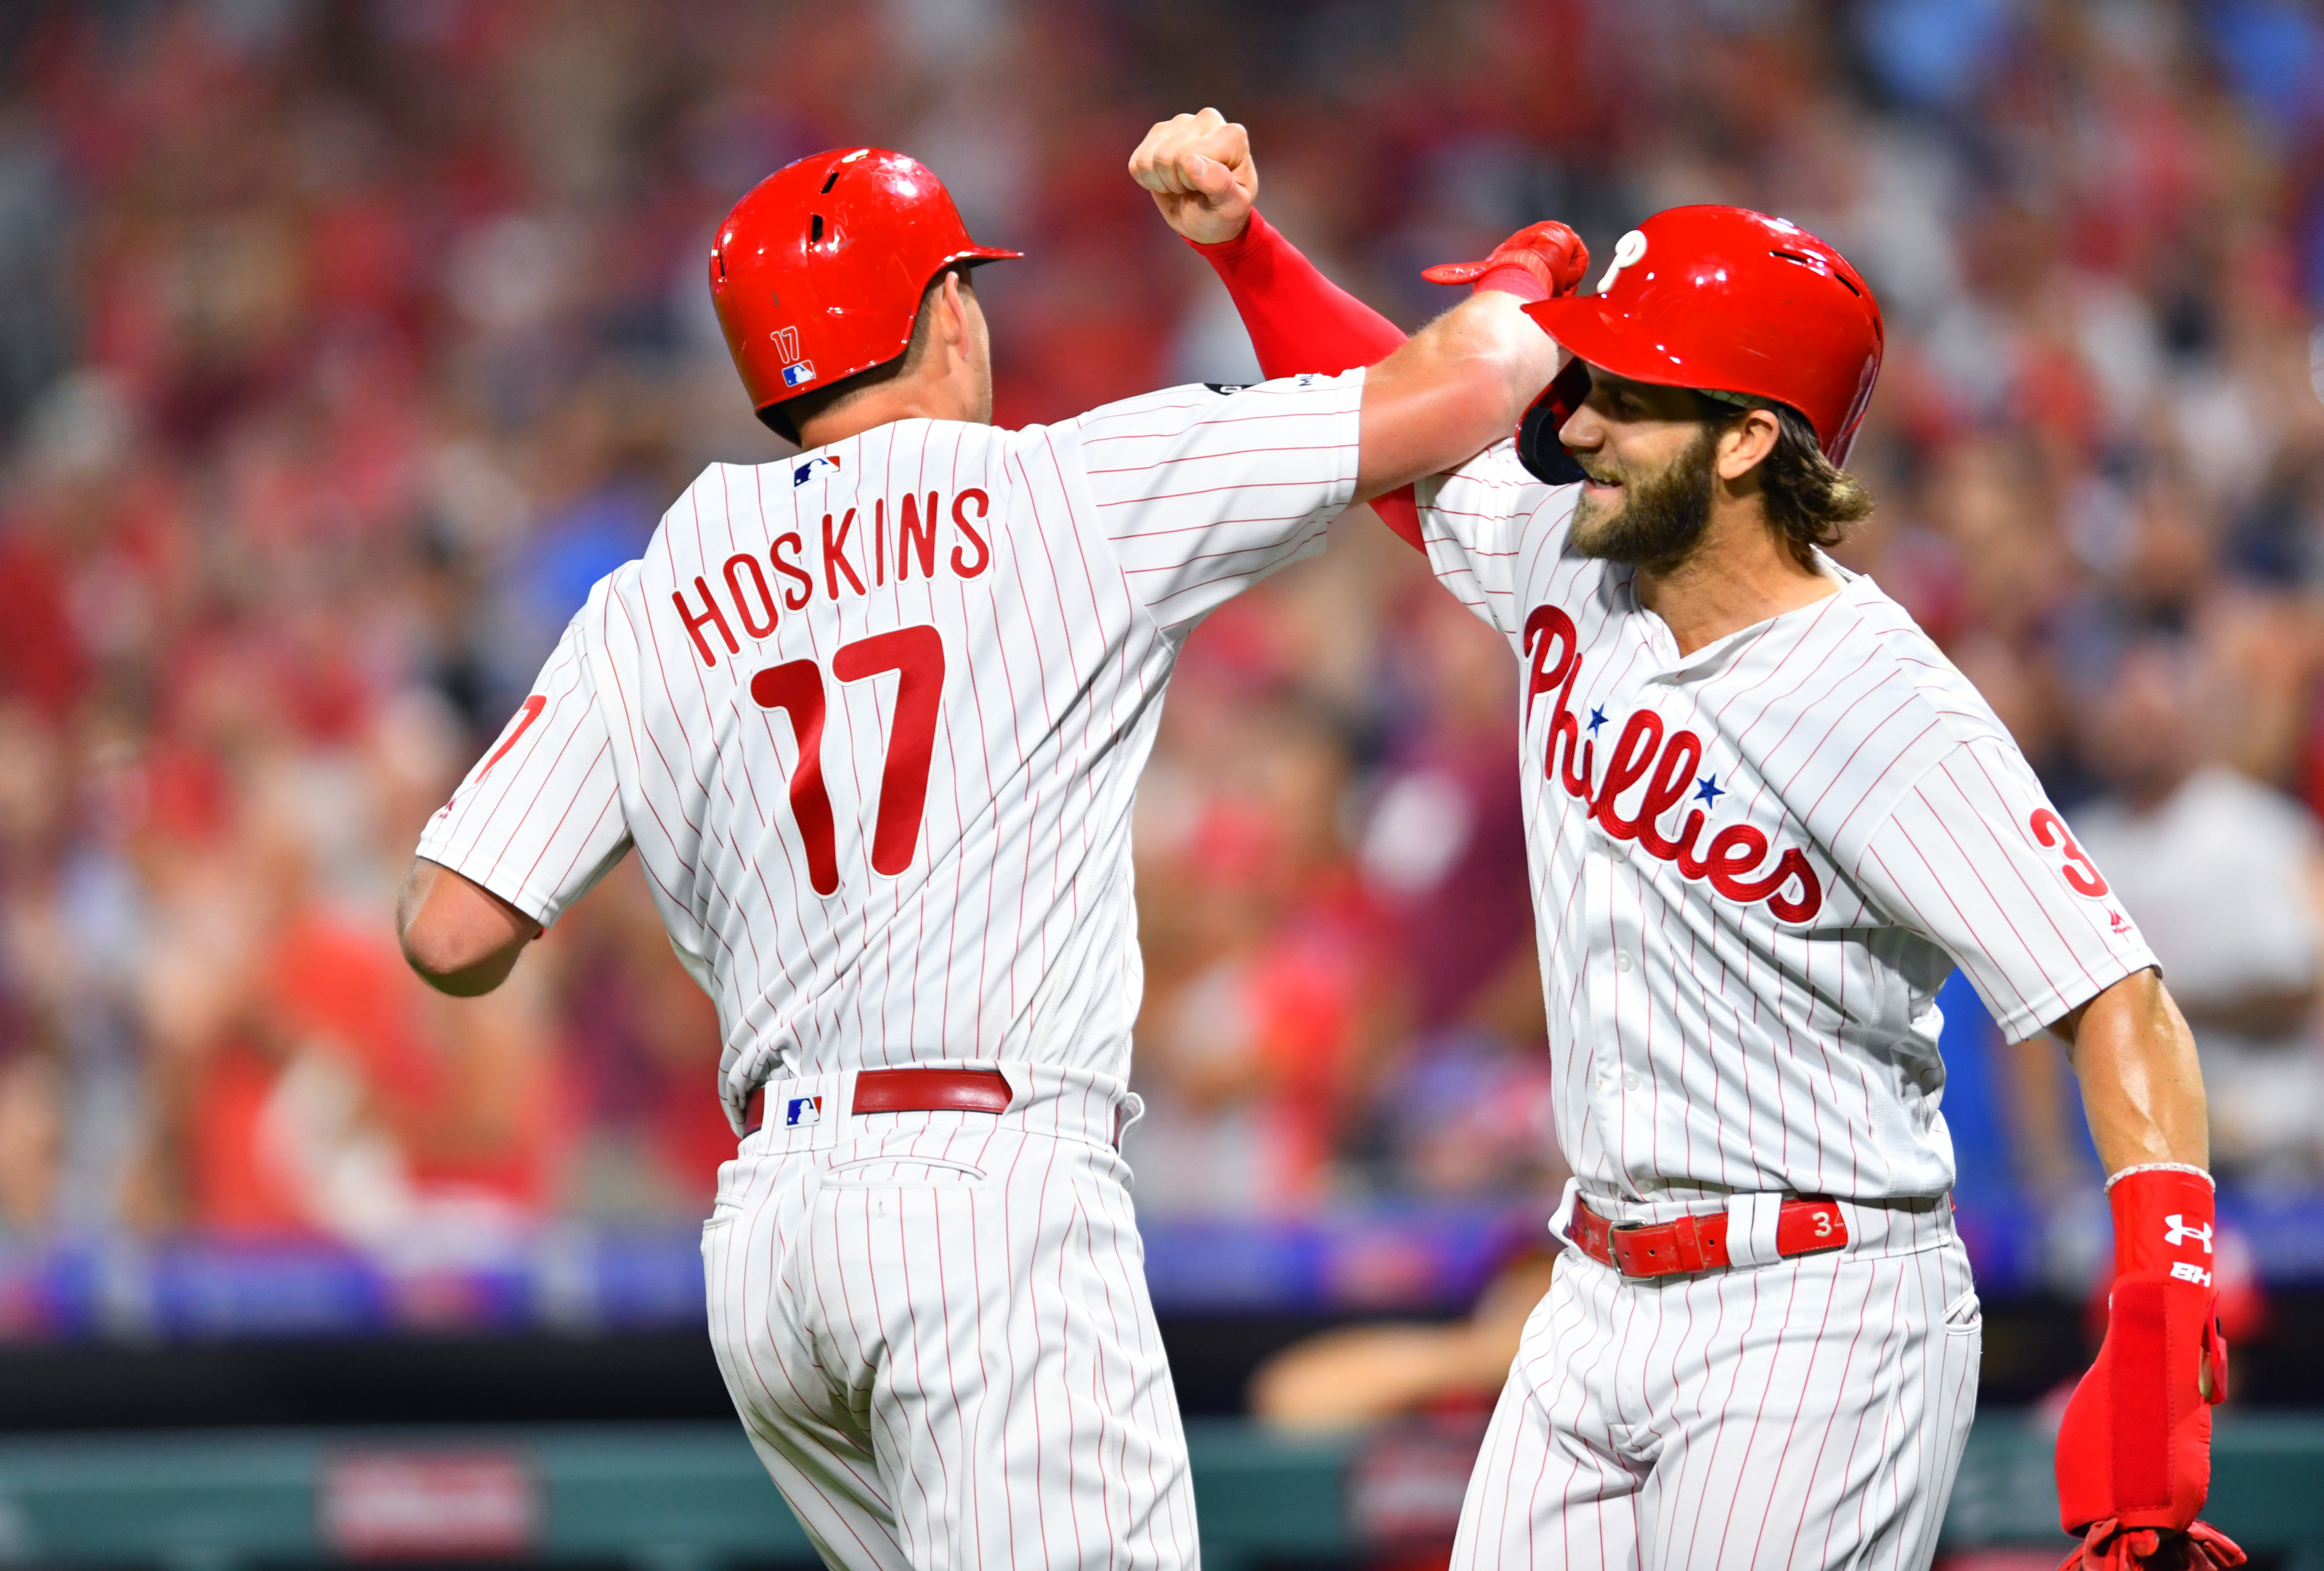 Philadelphia Phillies: Team preview and prediction for 2020 season - Page 3